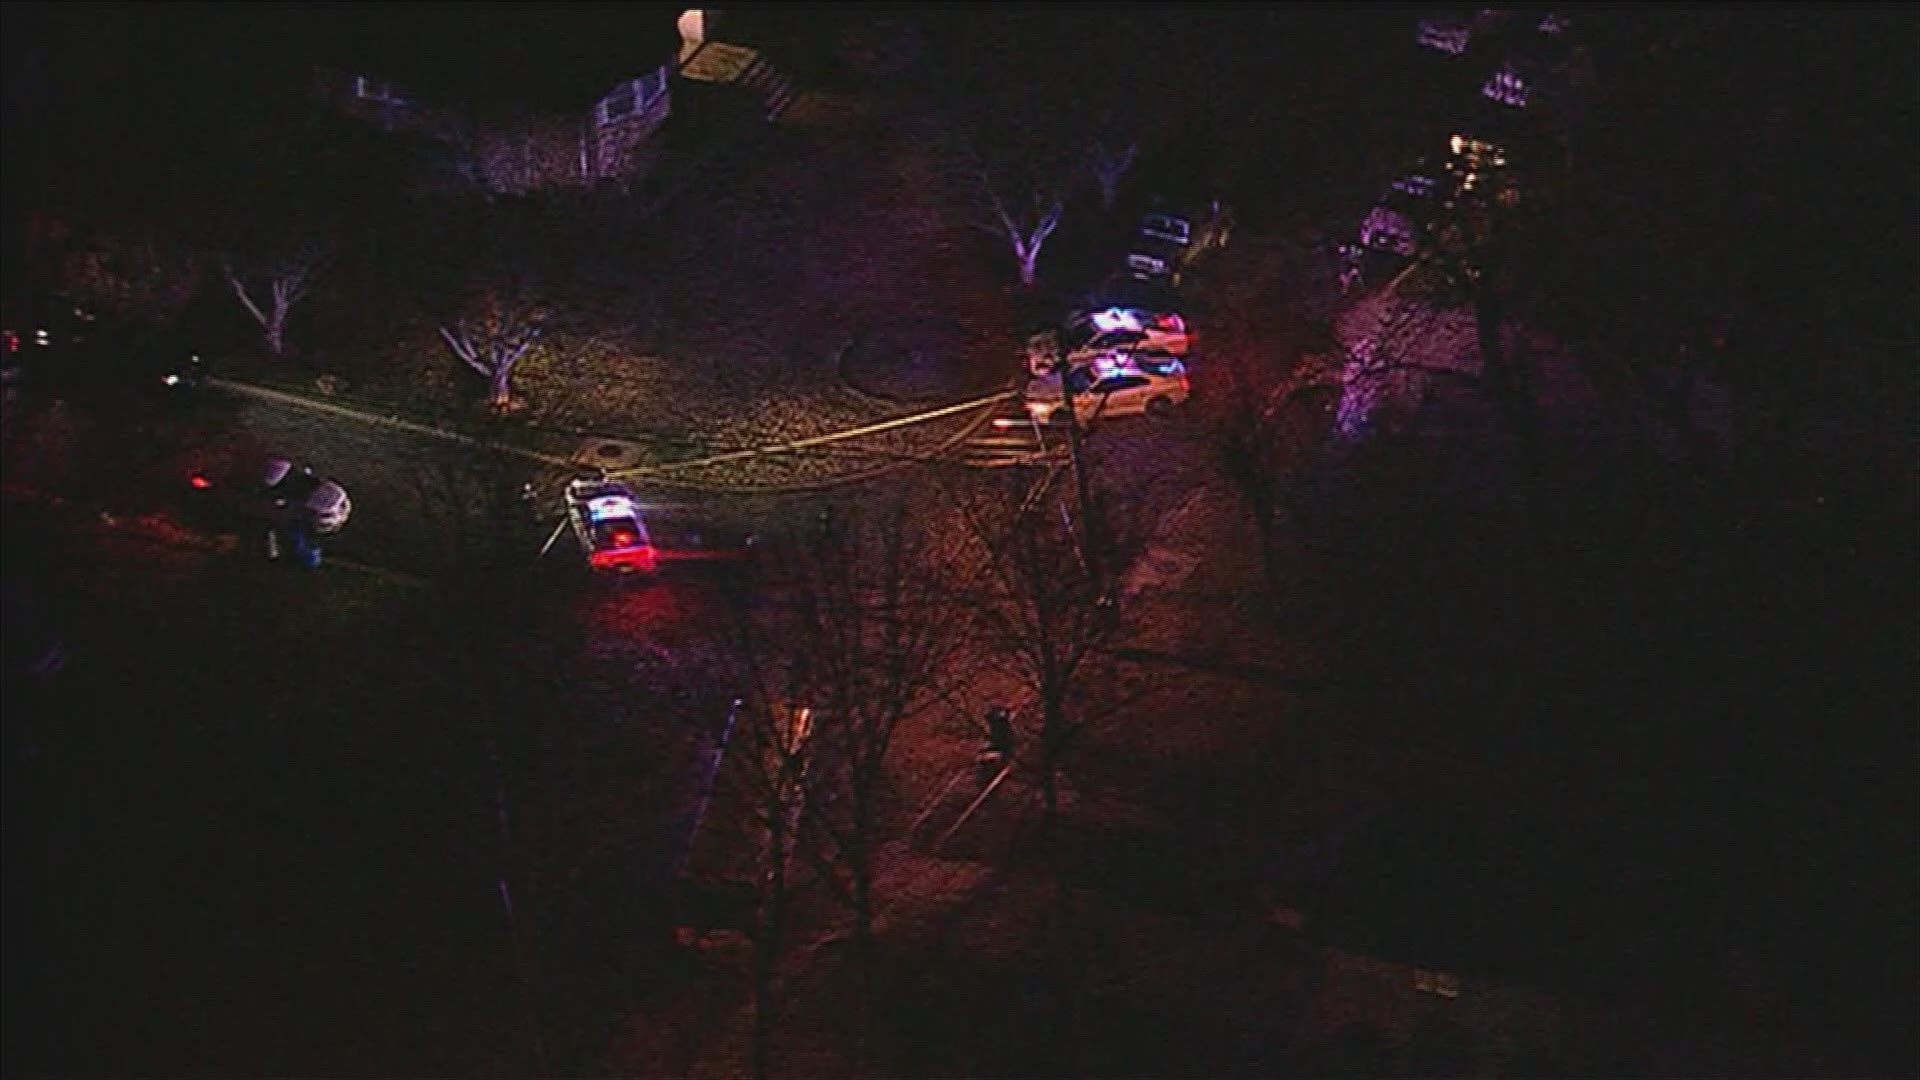 The accident happened in a Bethesda neighborhood, officials say.